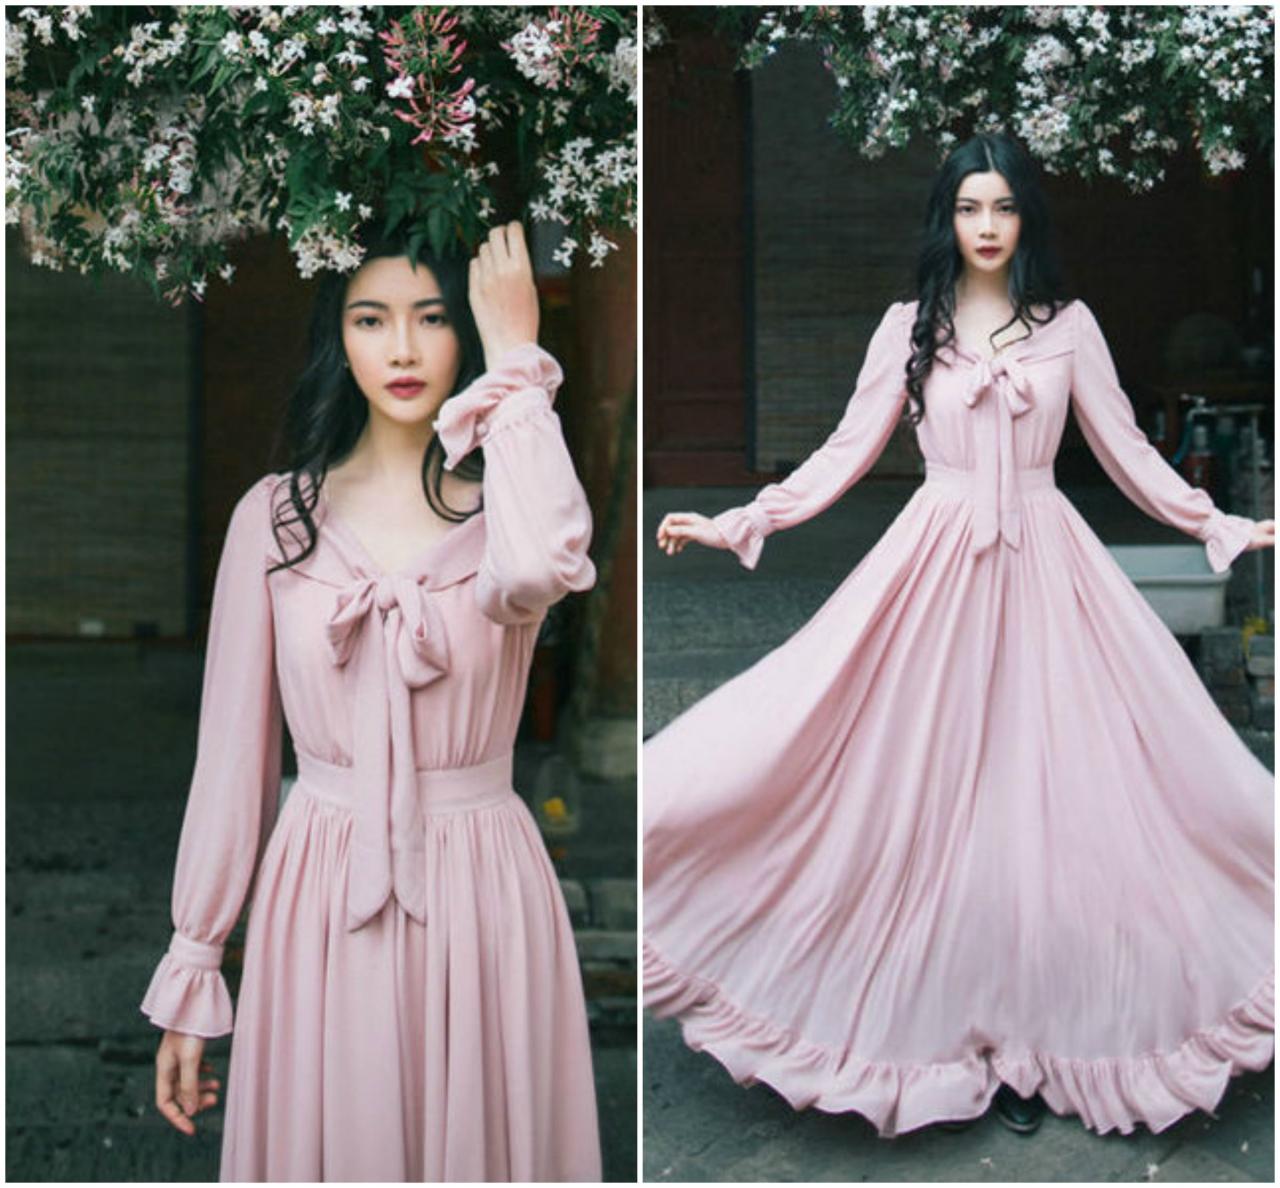 Beautiful Vintage Inspired Long Sleeve Pink Dress With Bow